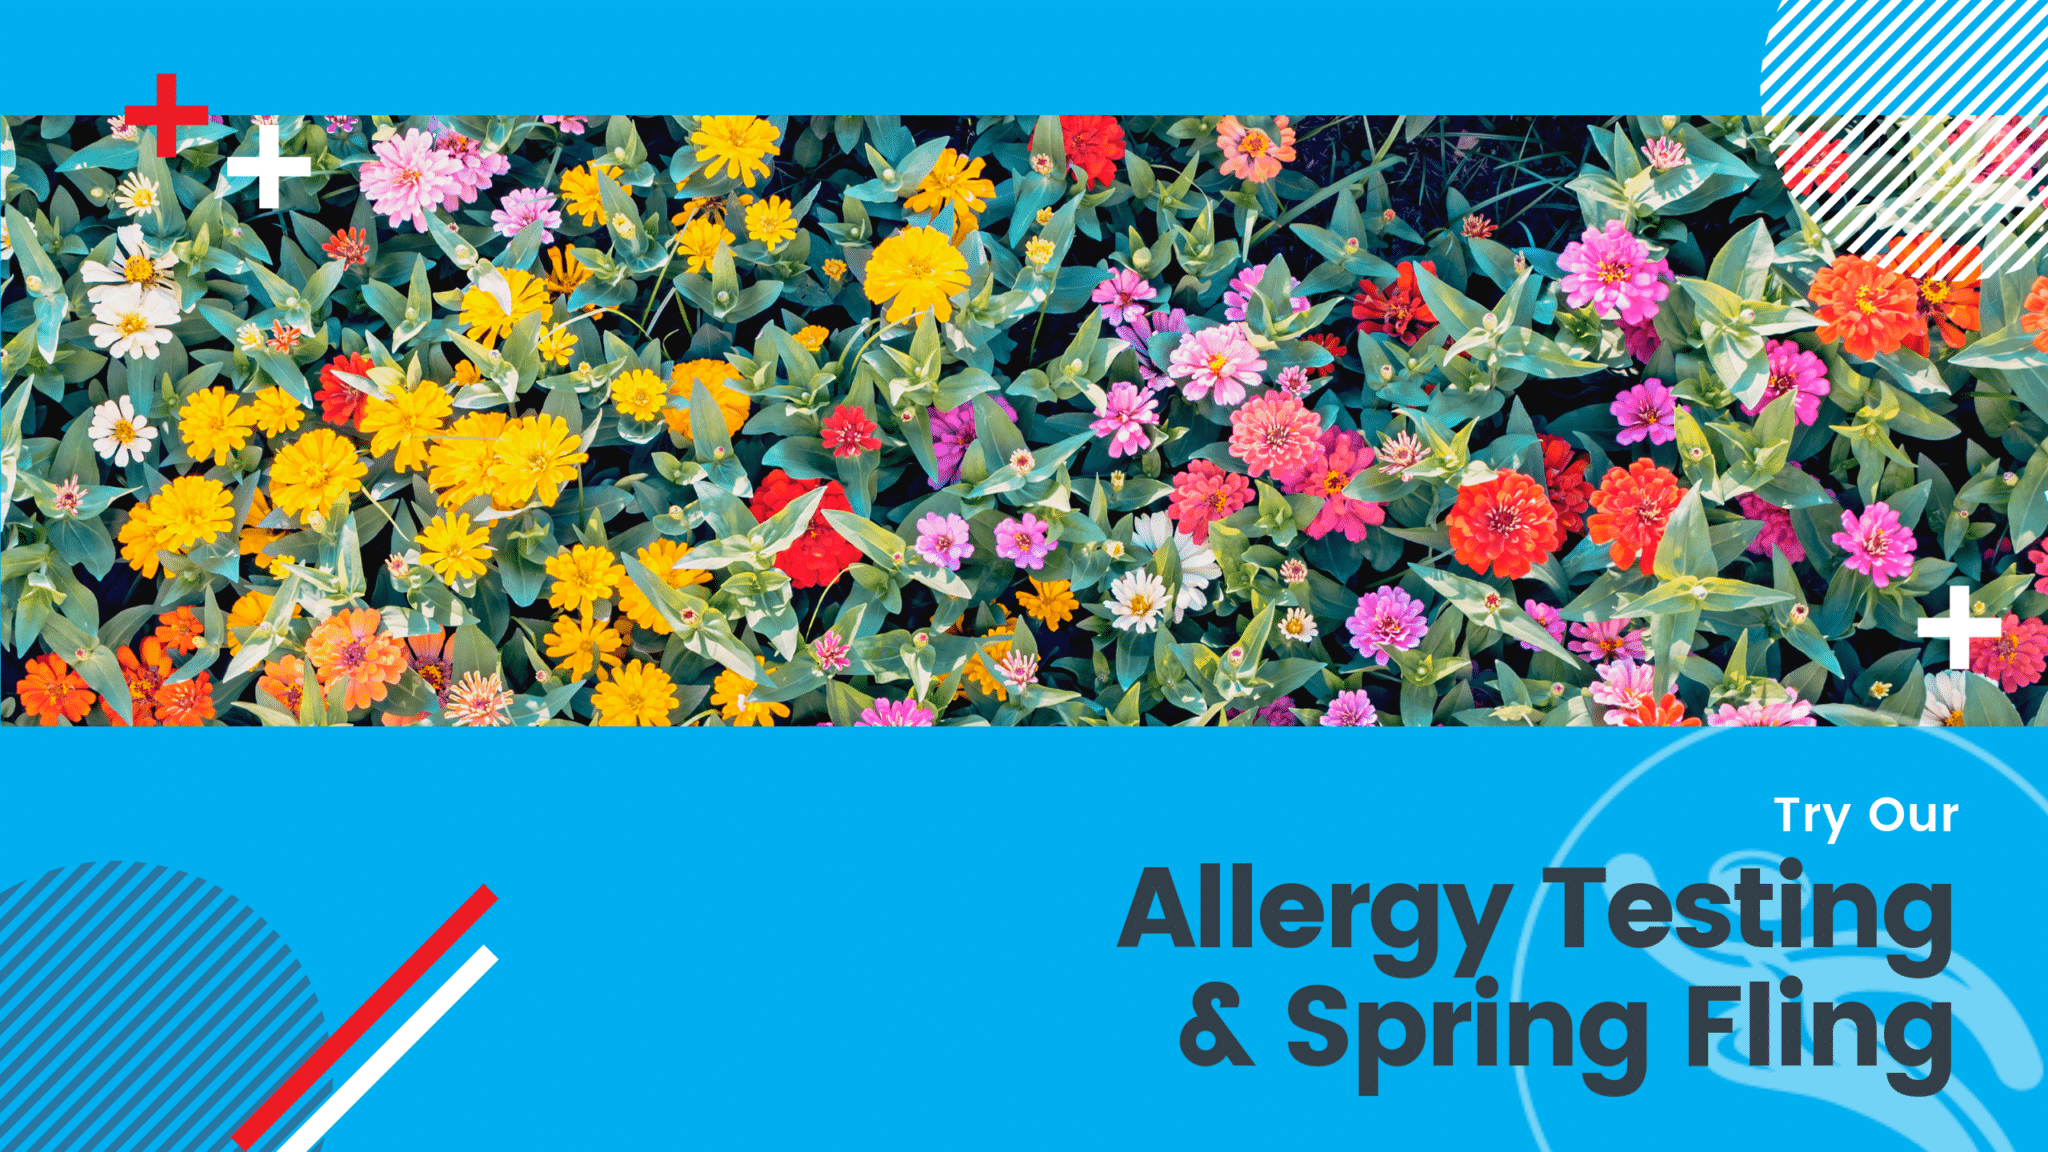 Graphic of flowers for allergy testing and BackFit Spring Fling